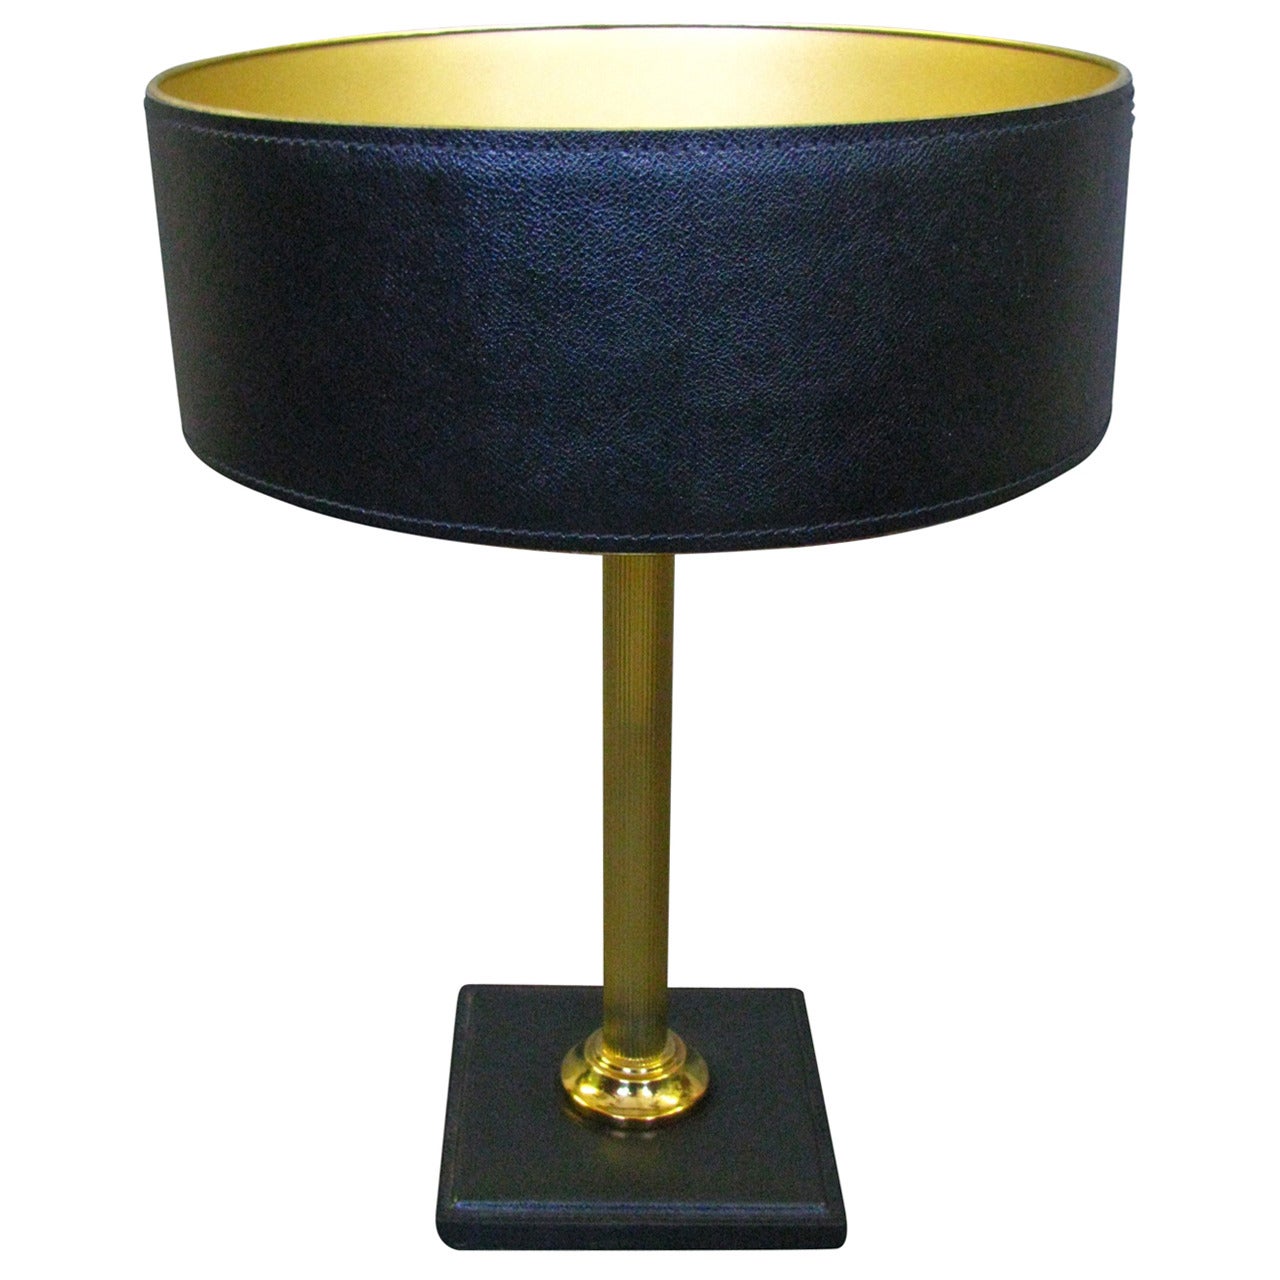 Art Deco Leather-Clad Table Desk Lamp by Adnet